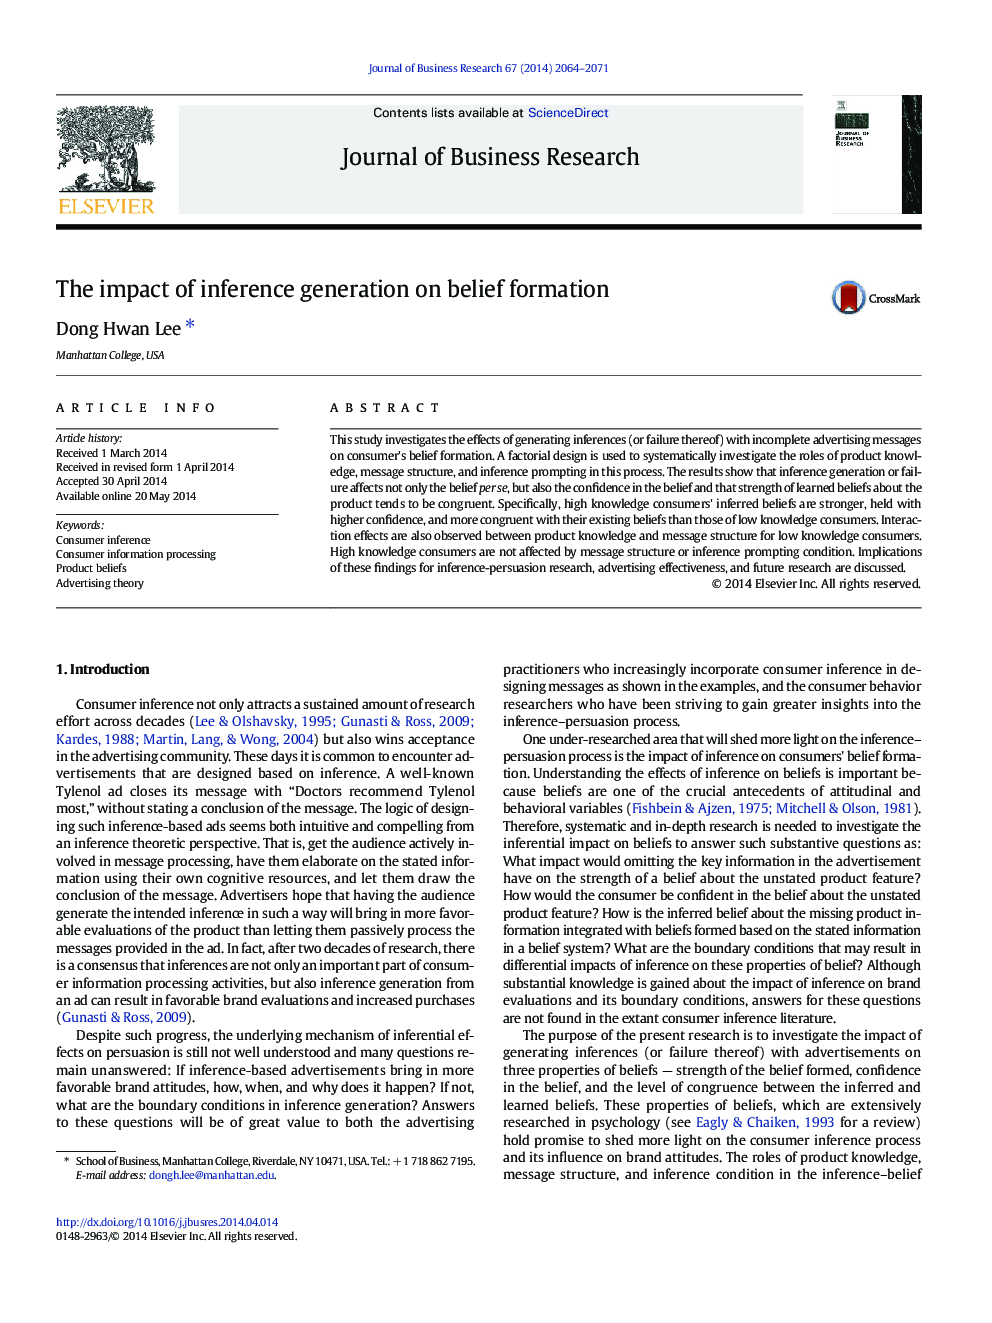 The impact of inference generation on belief formation